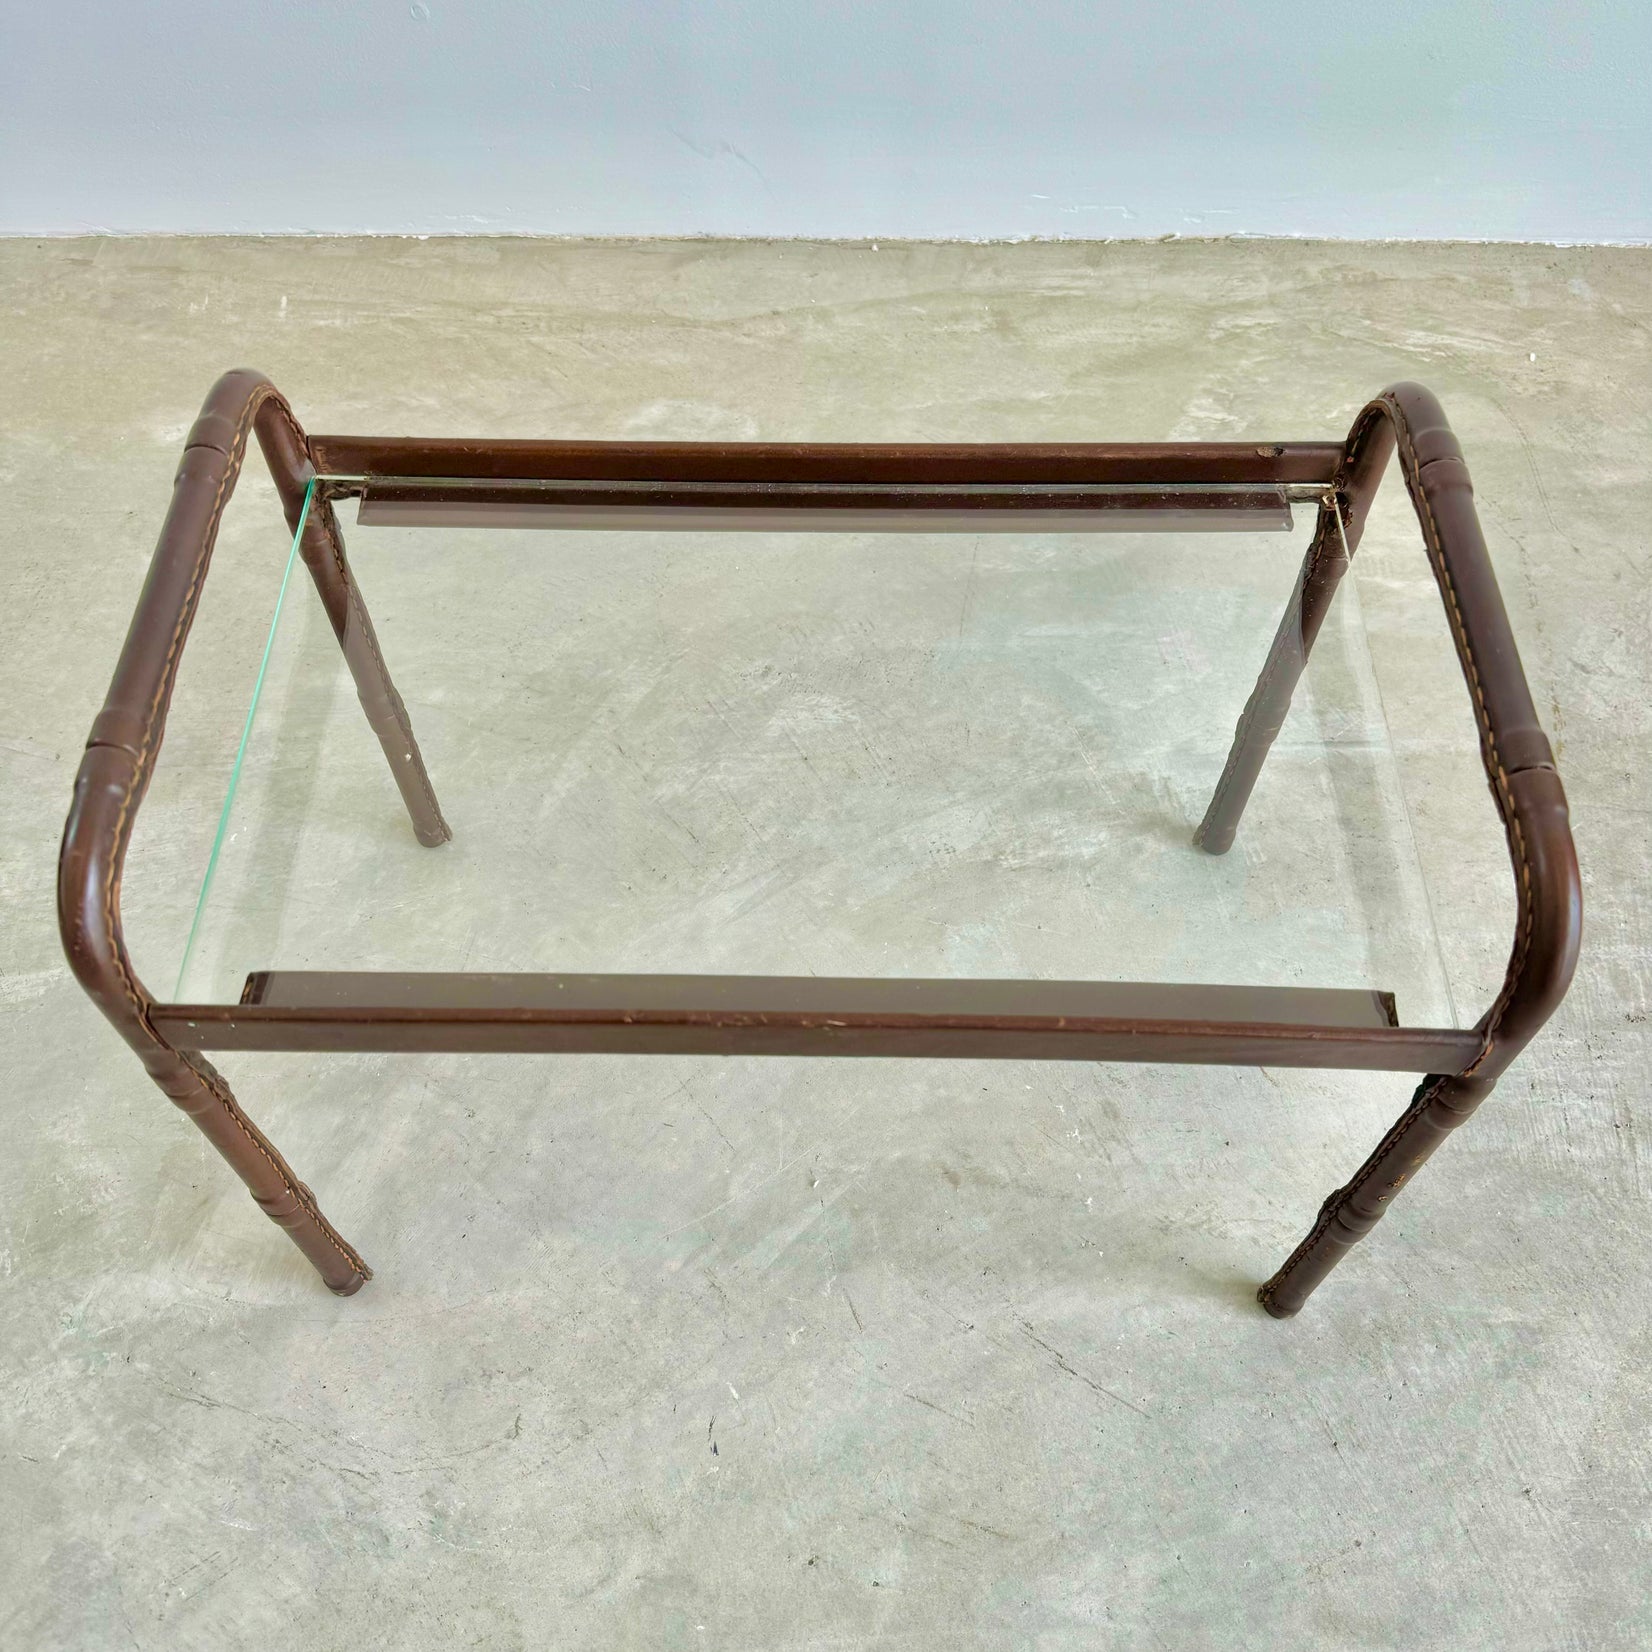 Jacques Adnet Leather and Glass Side Table, 1950s France